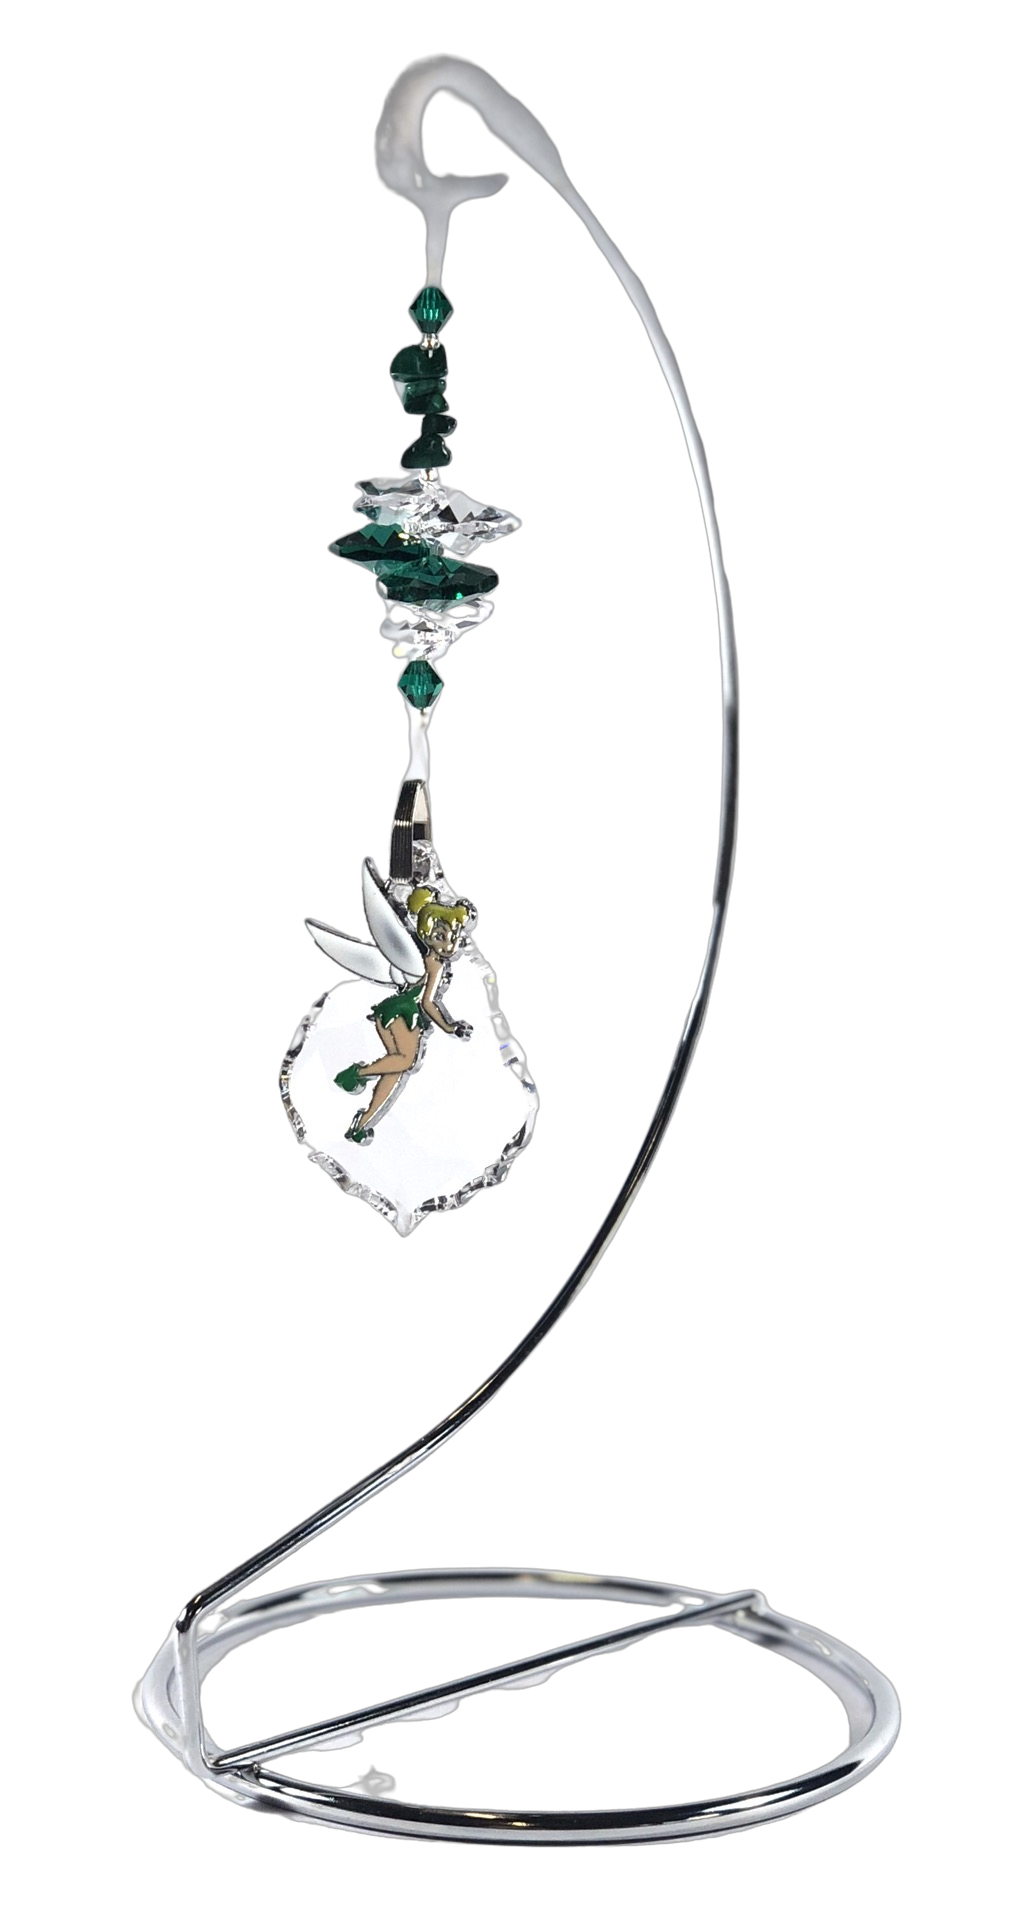 Tinkerbell - crystal suncatcher is decorated with malachite gemstones and come on this amazing stand.